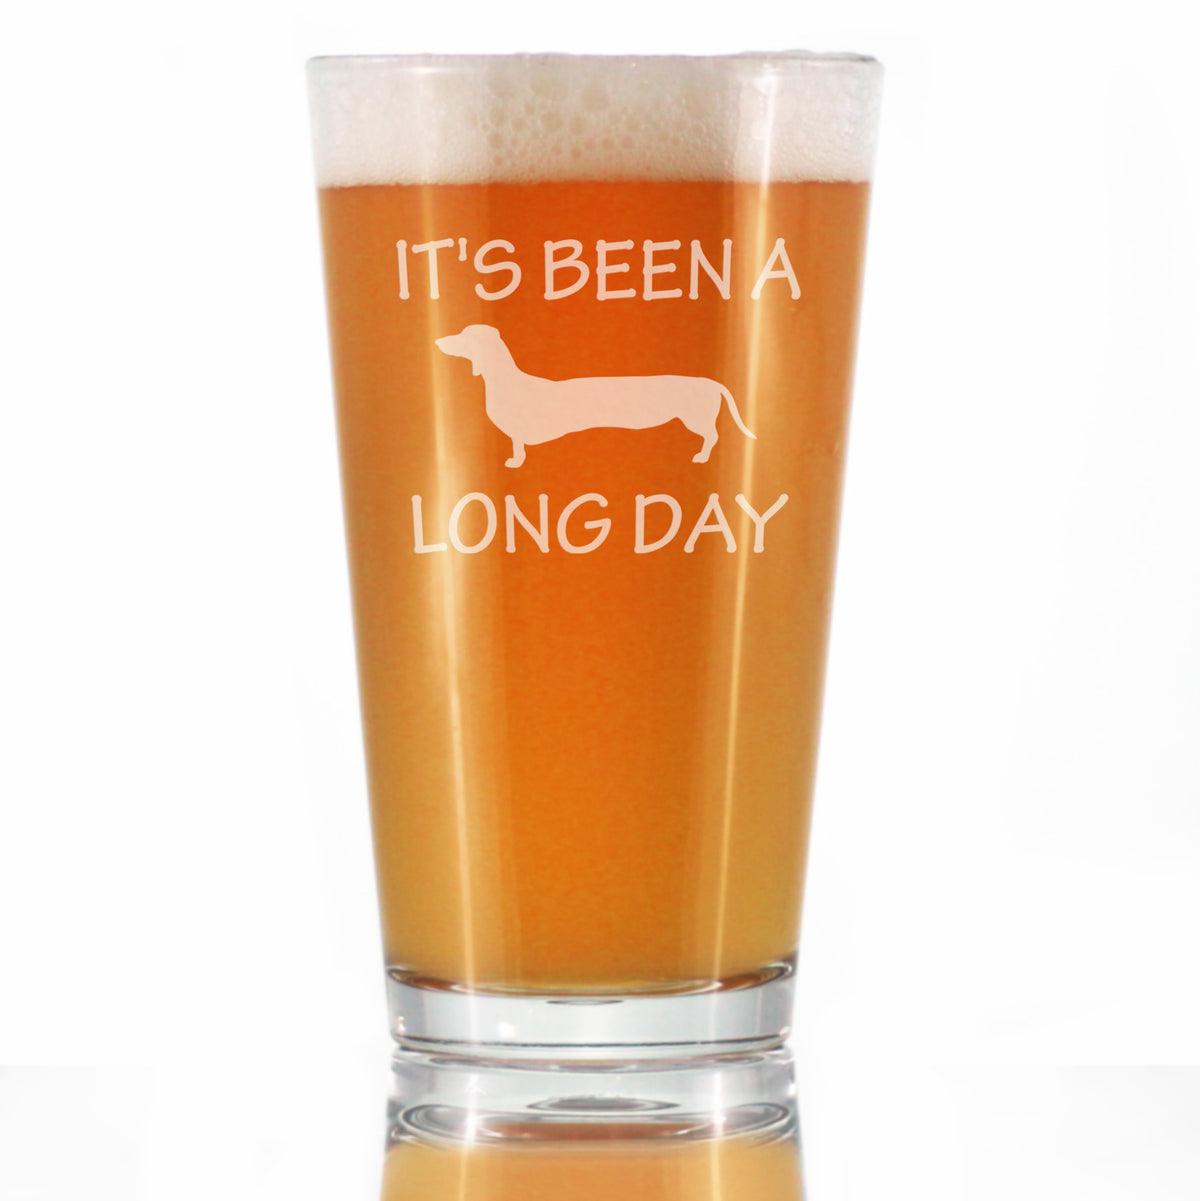 Long Day - Funny Pint Glass for Beer - Unique Dachshund Gifts for Men &amp; Women - Fun Dachshunds Themed Decor